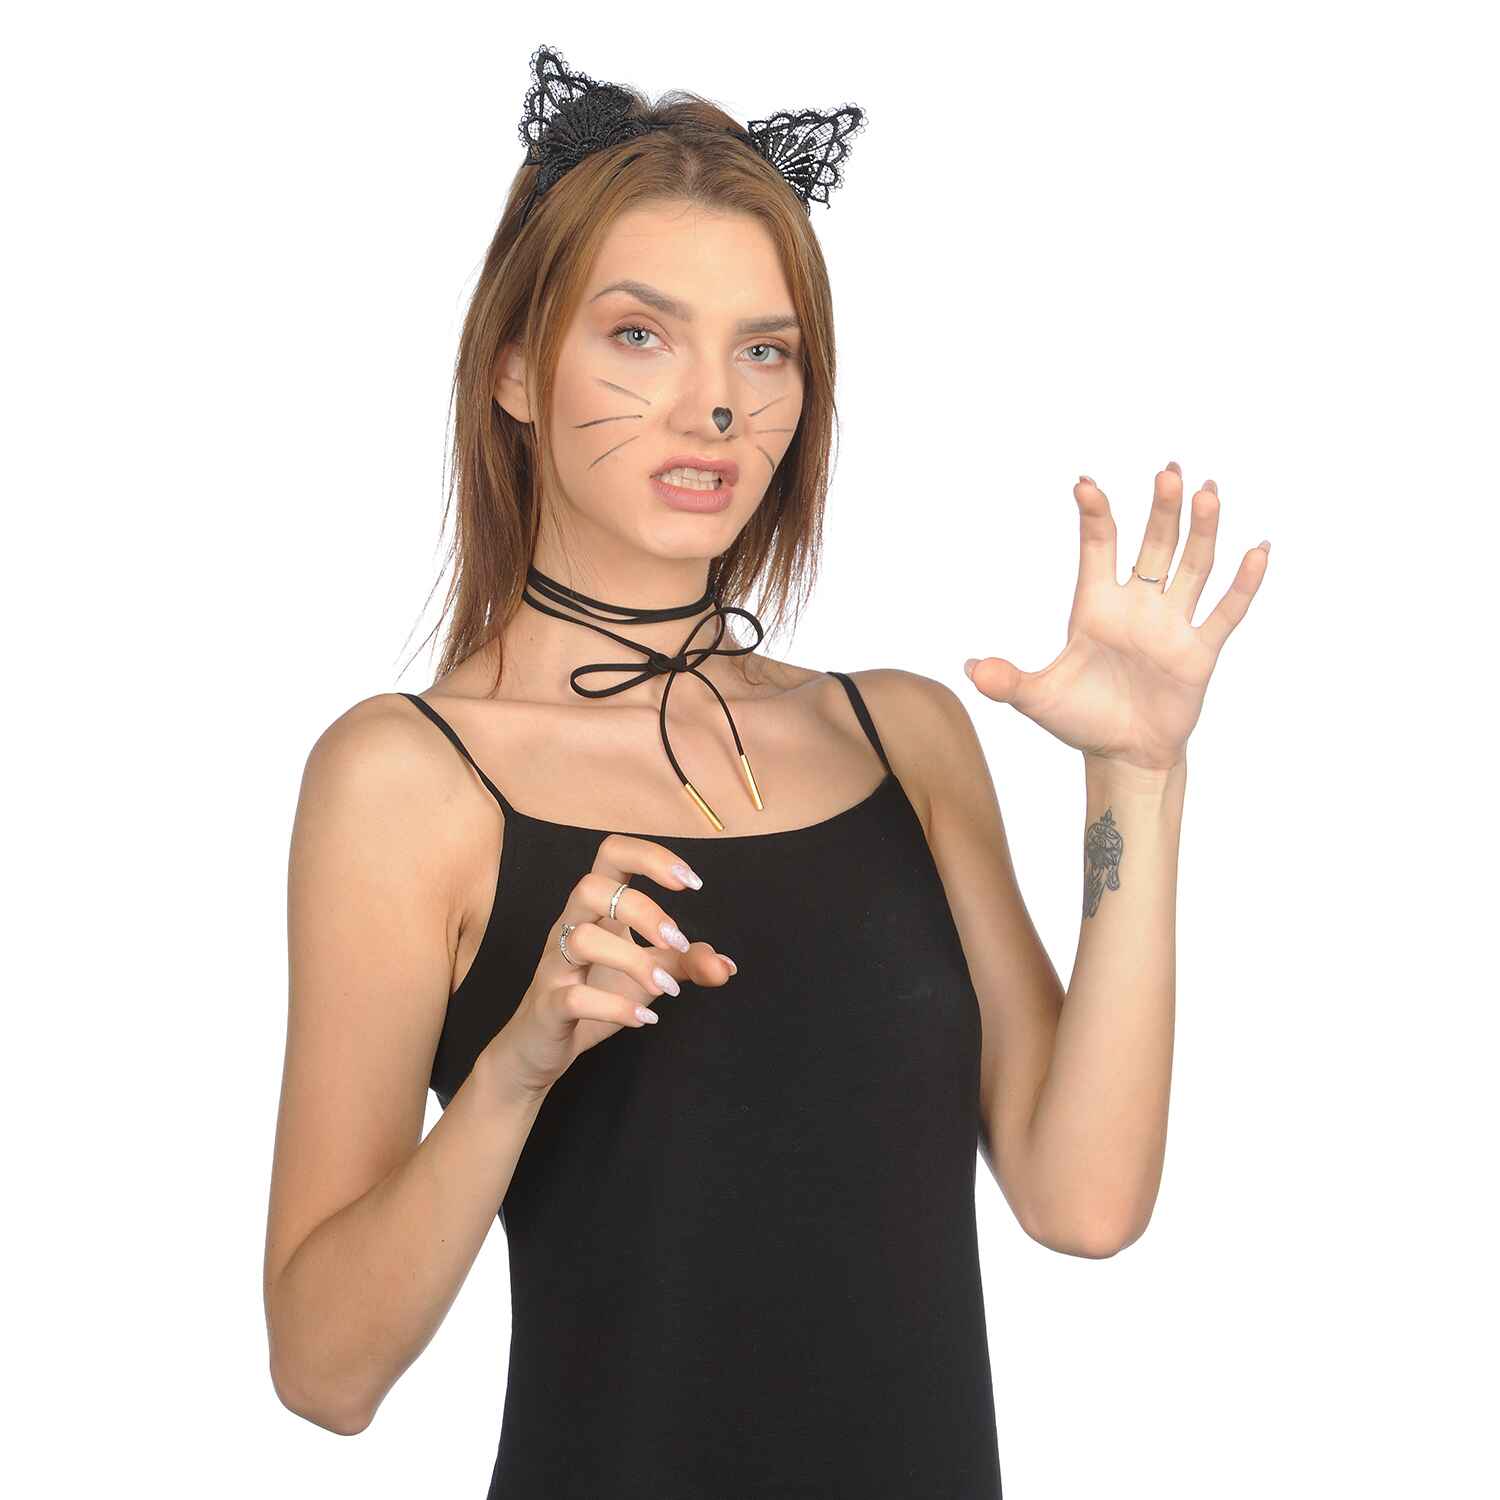  Halloween Cosplay Party Cat Costume Accessories  for Women Girls Adult Kids (Black)